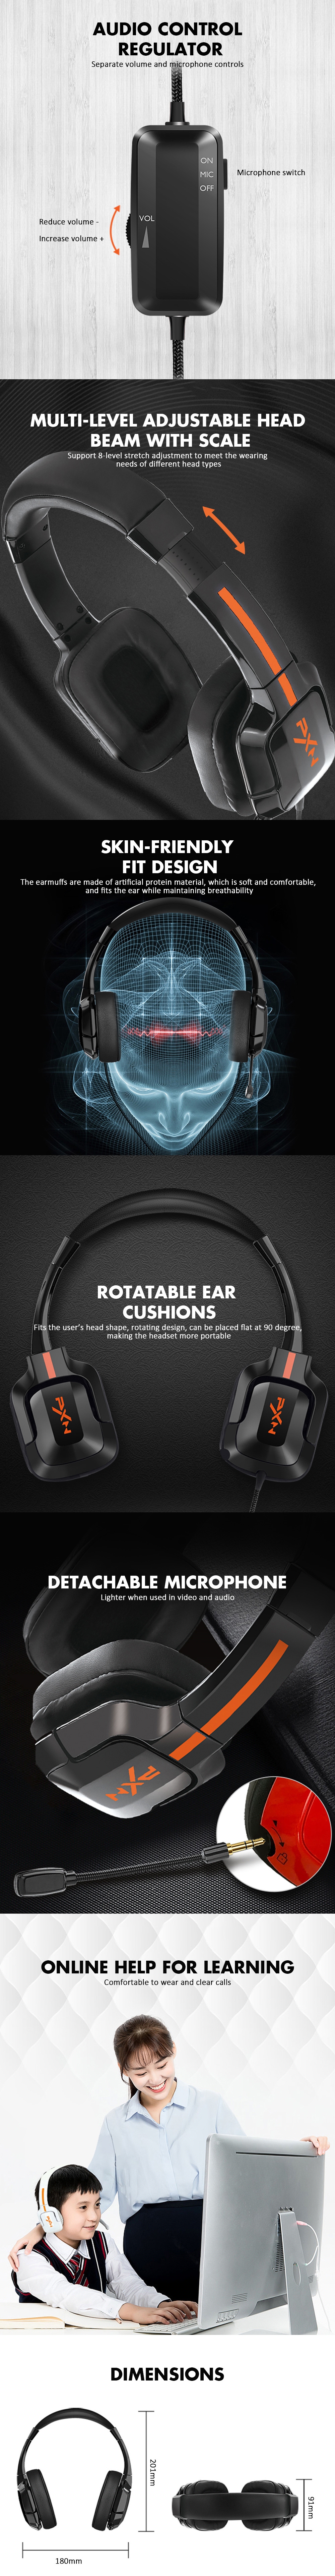 PXN-PXN-U305-Gaming-Headset-Support-8-Level-Stretch-Adjustment-Noise-Reduction-Earphones-With-MIC-fo-1659249-2